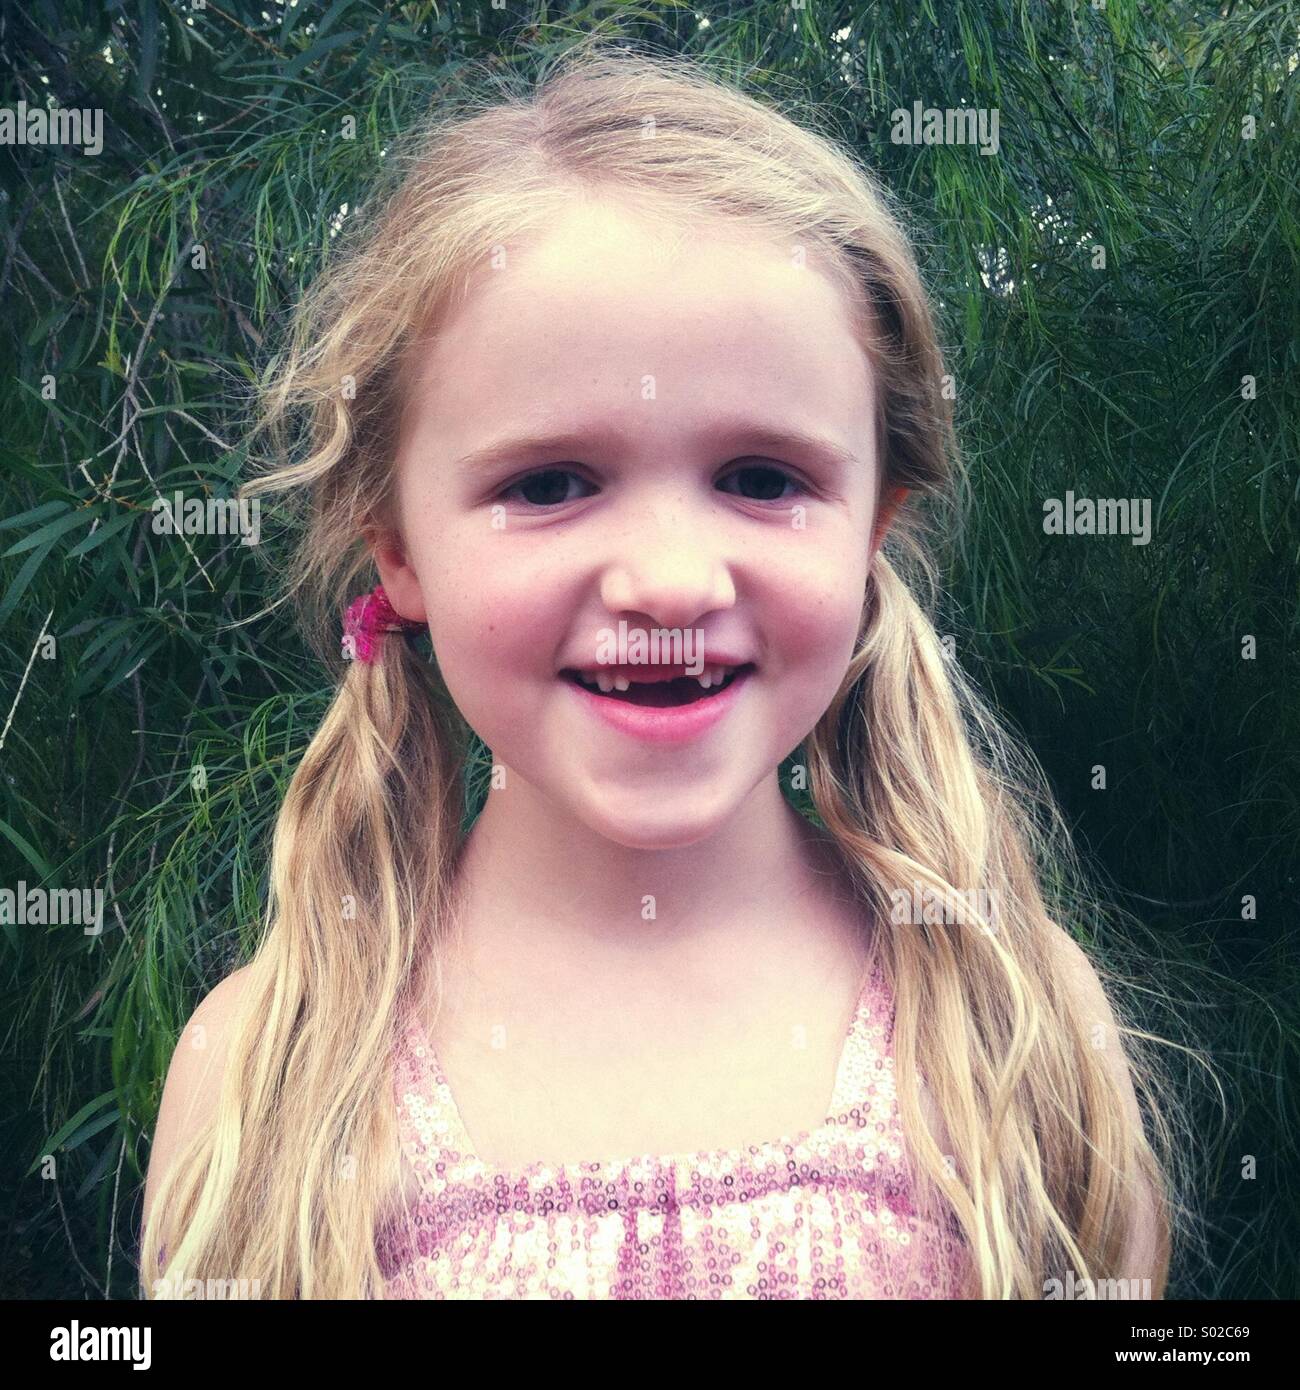 Little smiling girl missing two front teeth Stock Photo